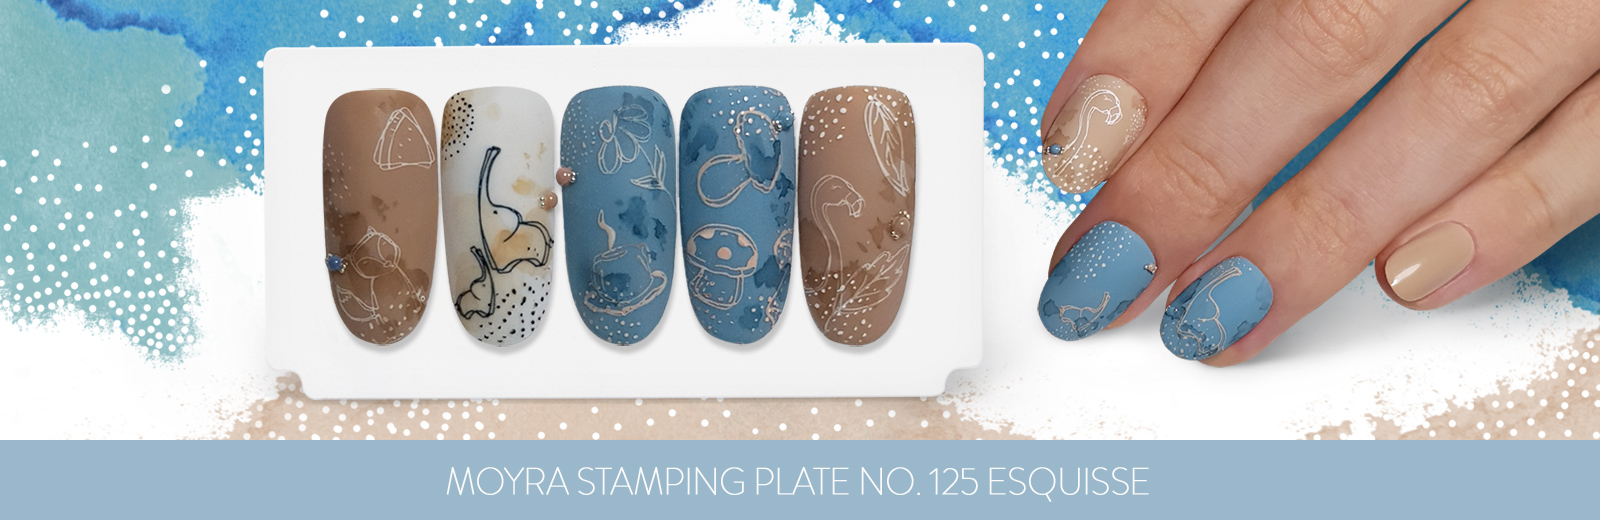 New stamping plate has arrived! No. 125 Esquisse